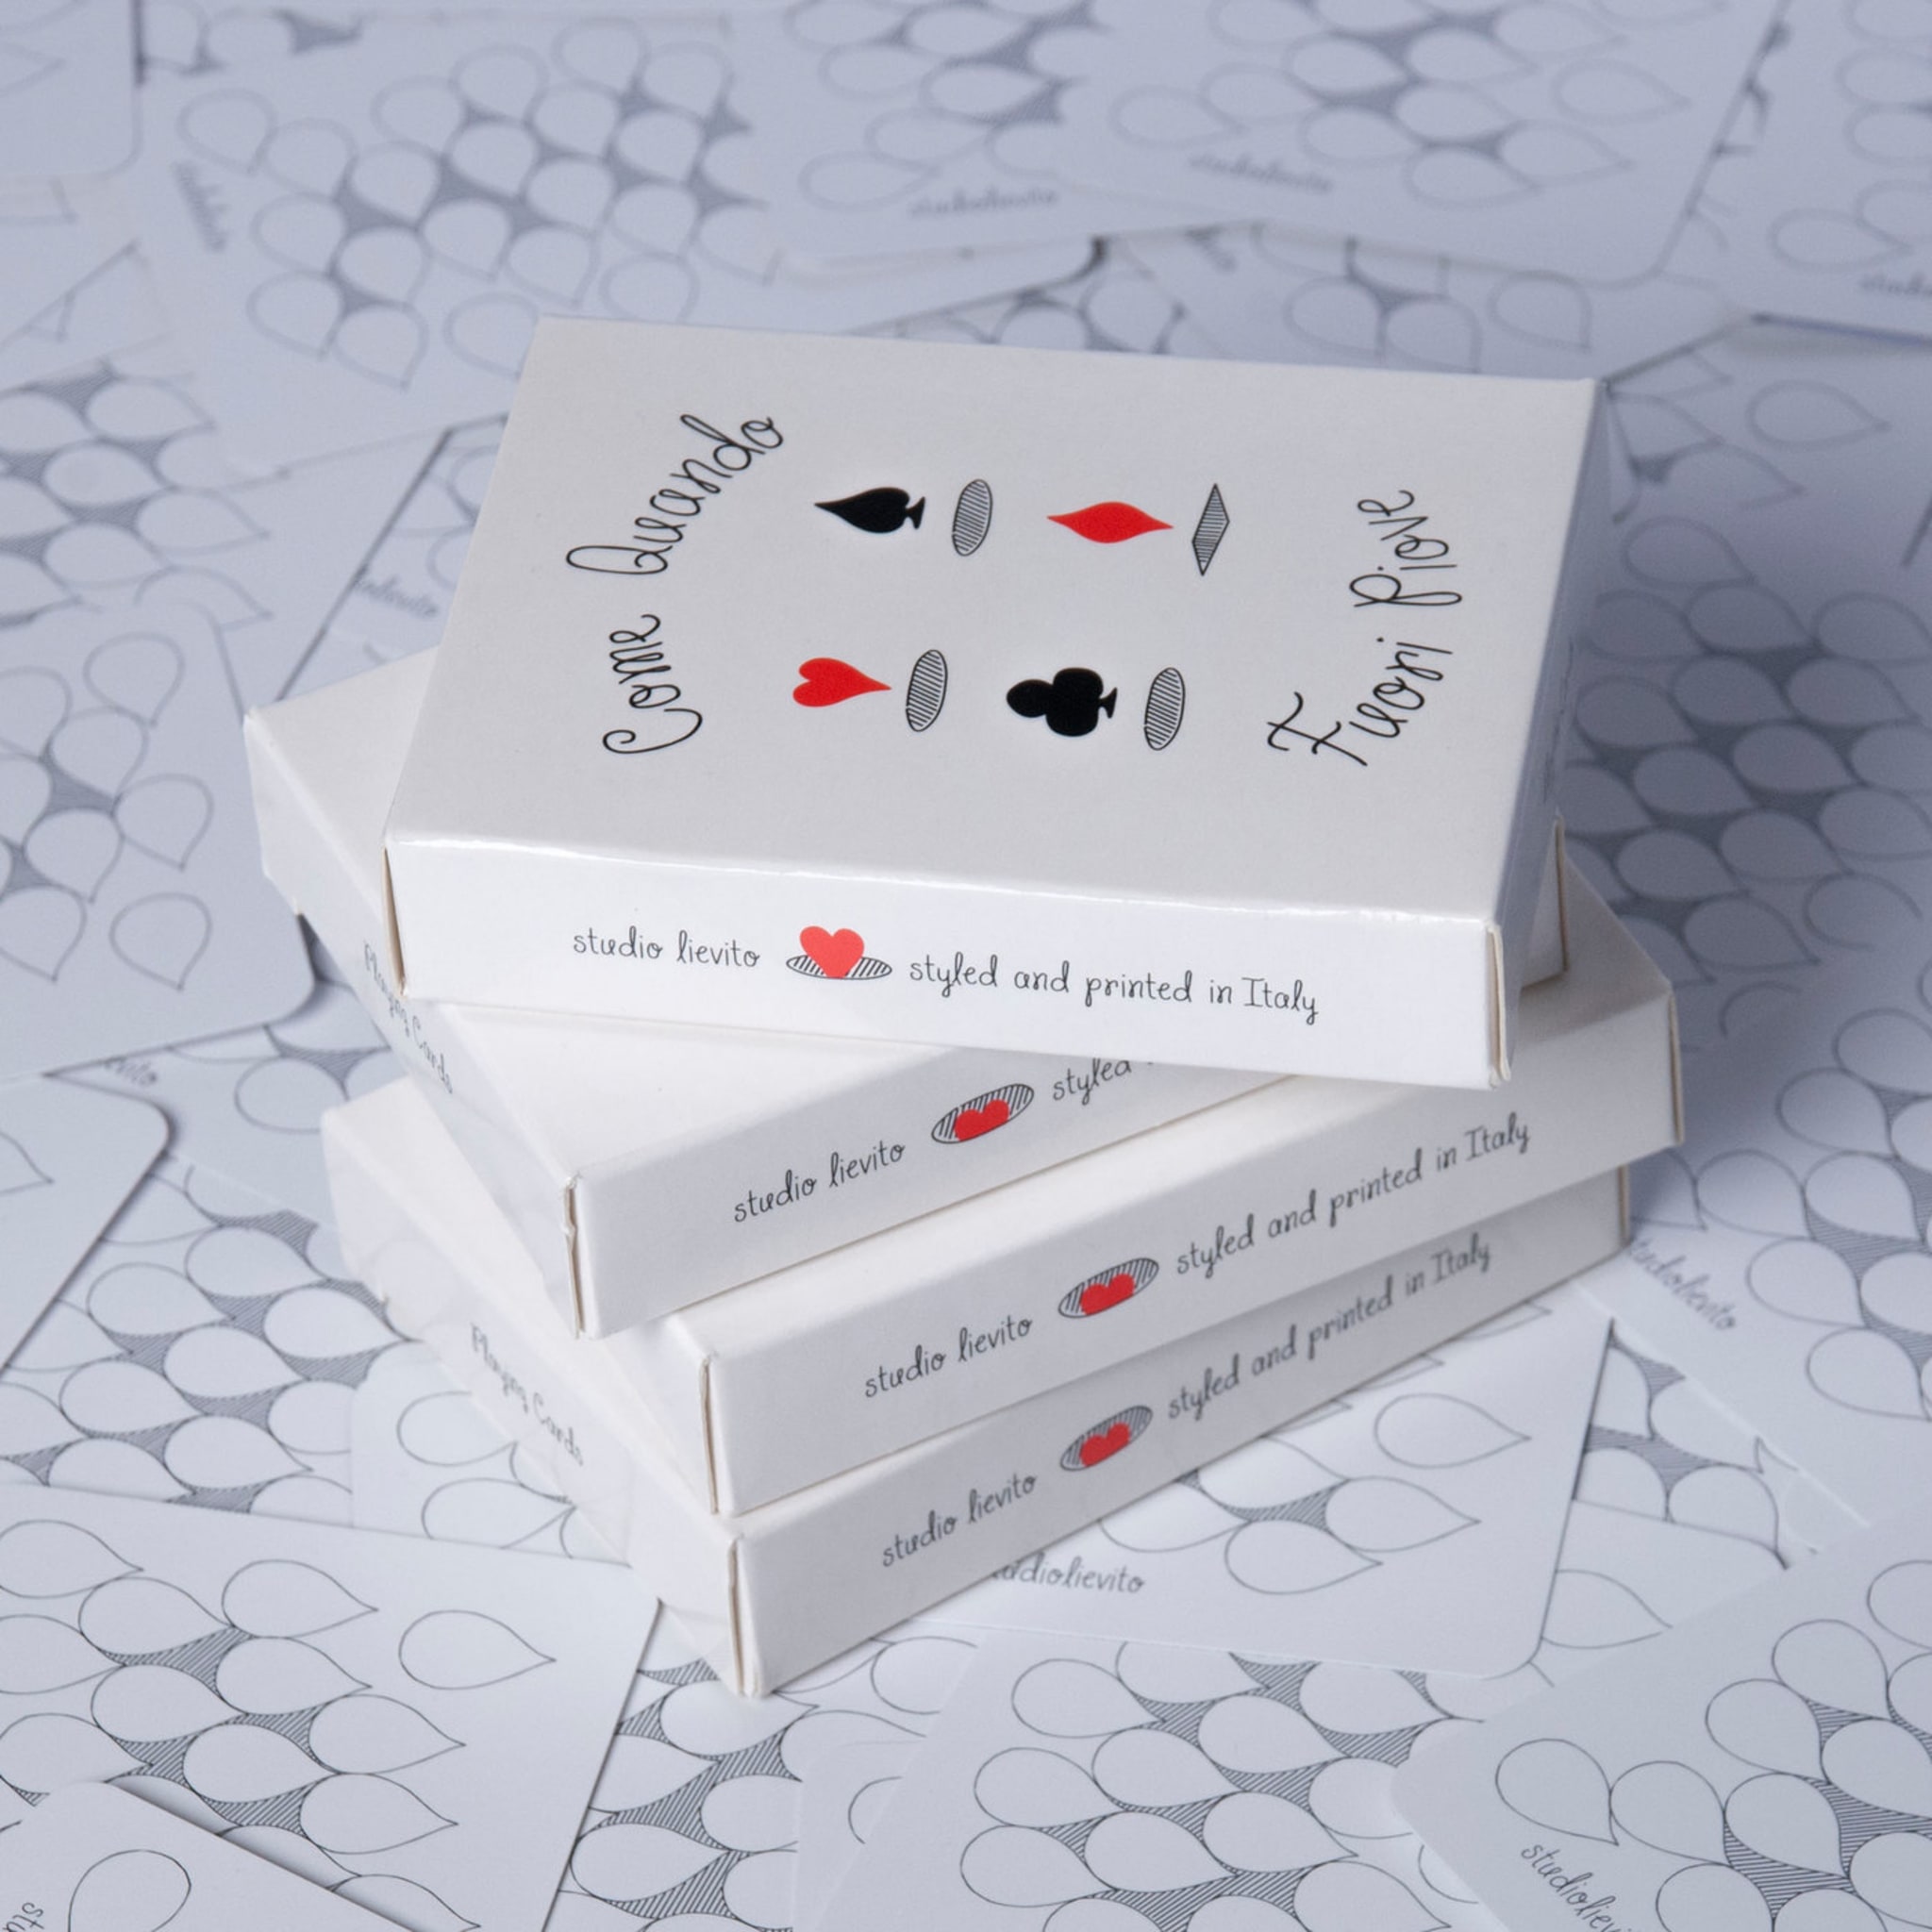 Comequandofuoripiove Playing Cards - Alternative view 1